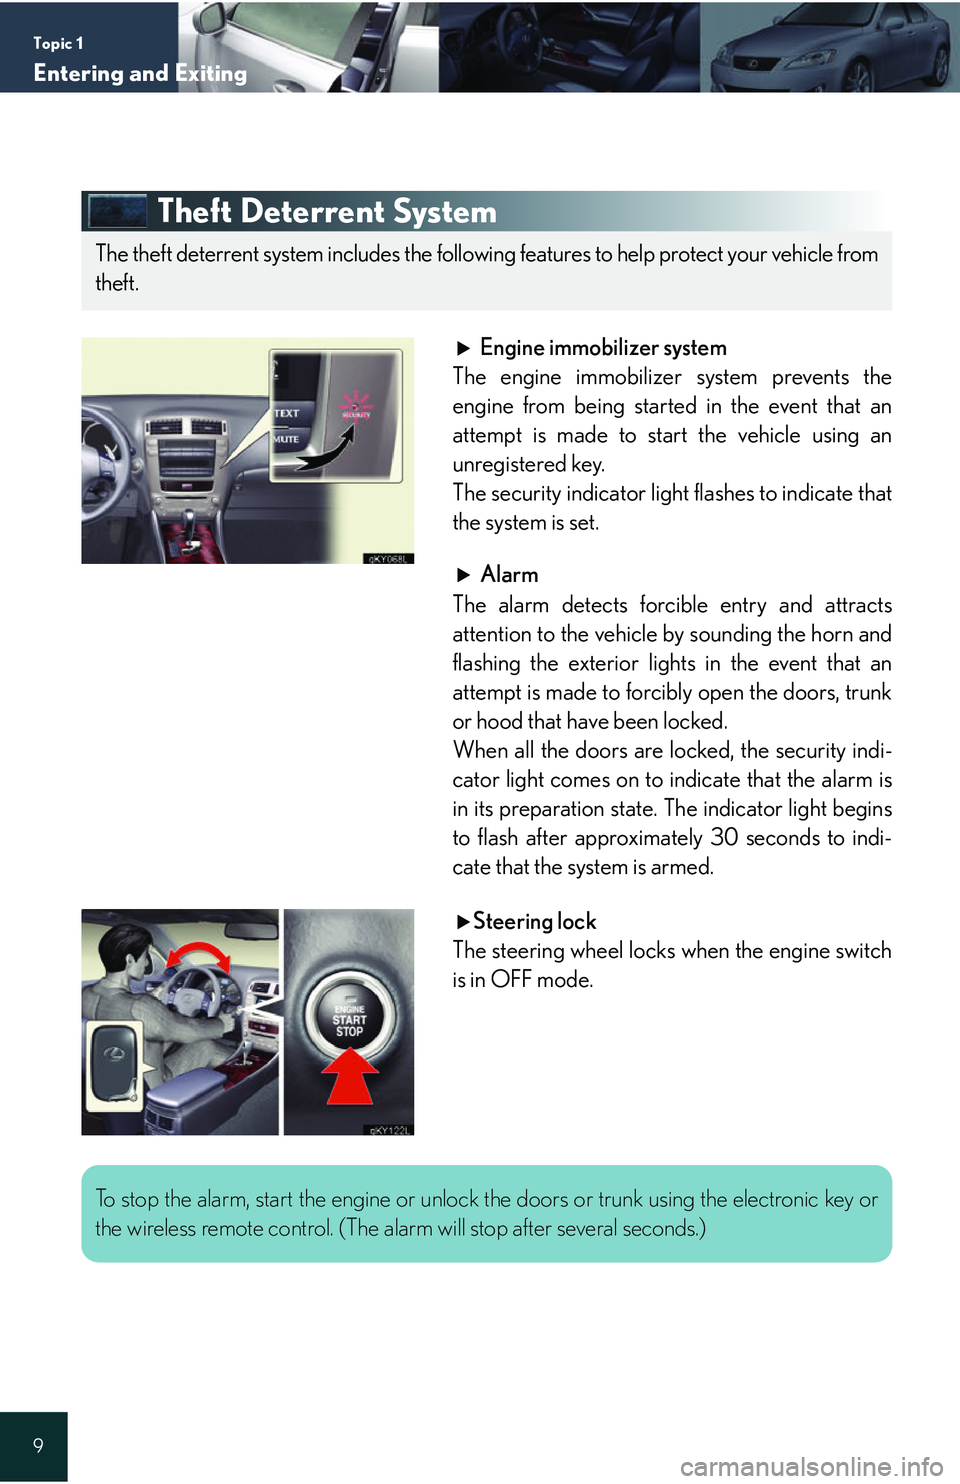 Lexus IS250 2006  Instrument cluster / LEXUS 2006 IS350/250 QUICK REFERENCE GUIDE Topic 1
Entering and Exiting
9
Theft Deterrent System
Engine immobilizer system
The engine immobilizer system prevents the
engine from being started in the event that an
attempt is made to start the v